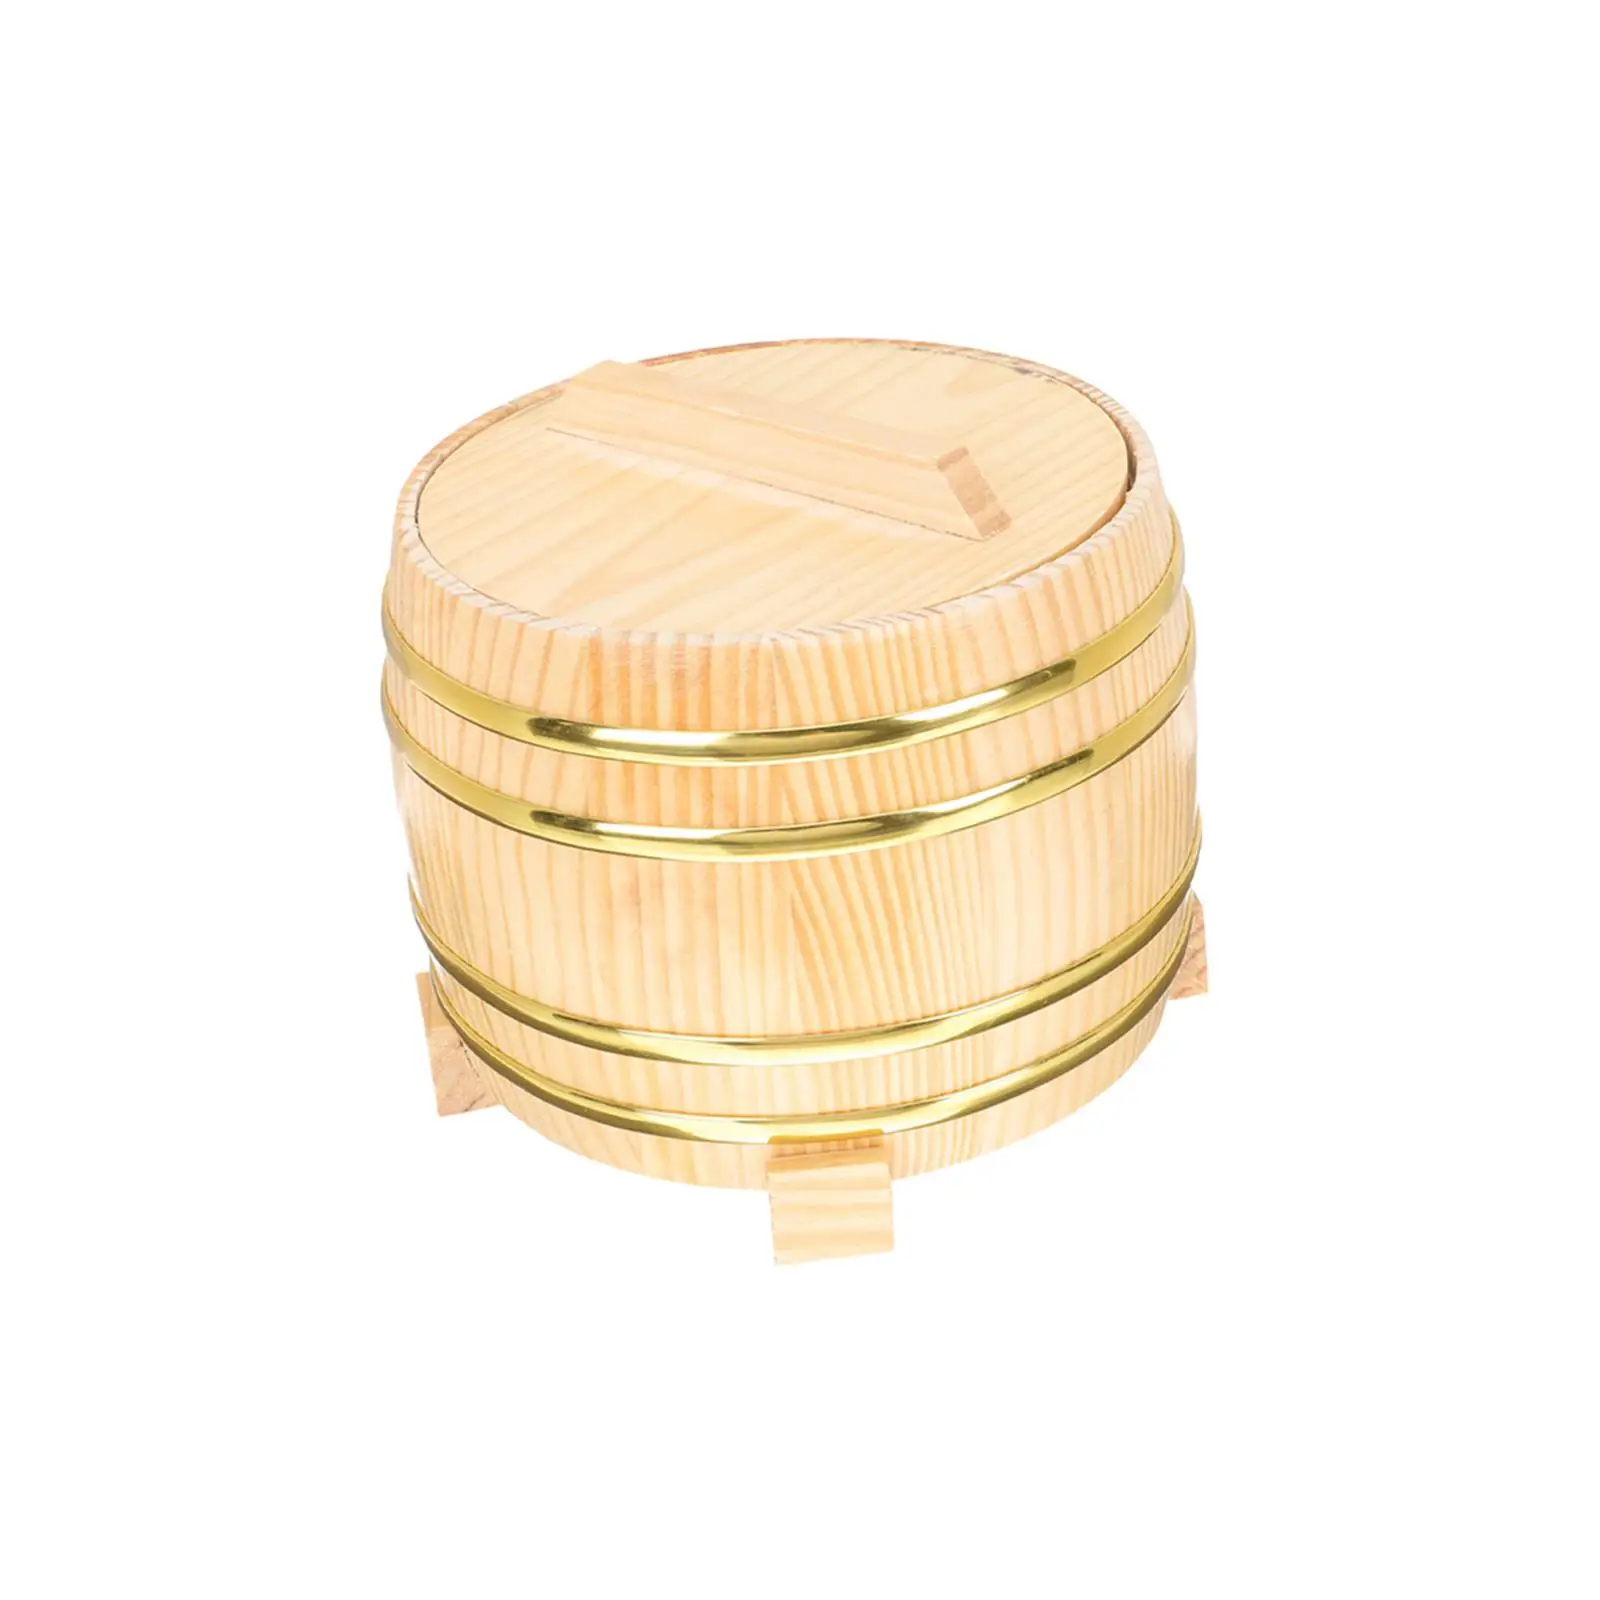 Wooden Sushi Barrel 16cm Rice Steamed Cask Wooden Rice Bowl Multifunction with Lid Simple Using Mixing Pot Container Barrel